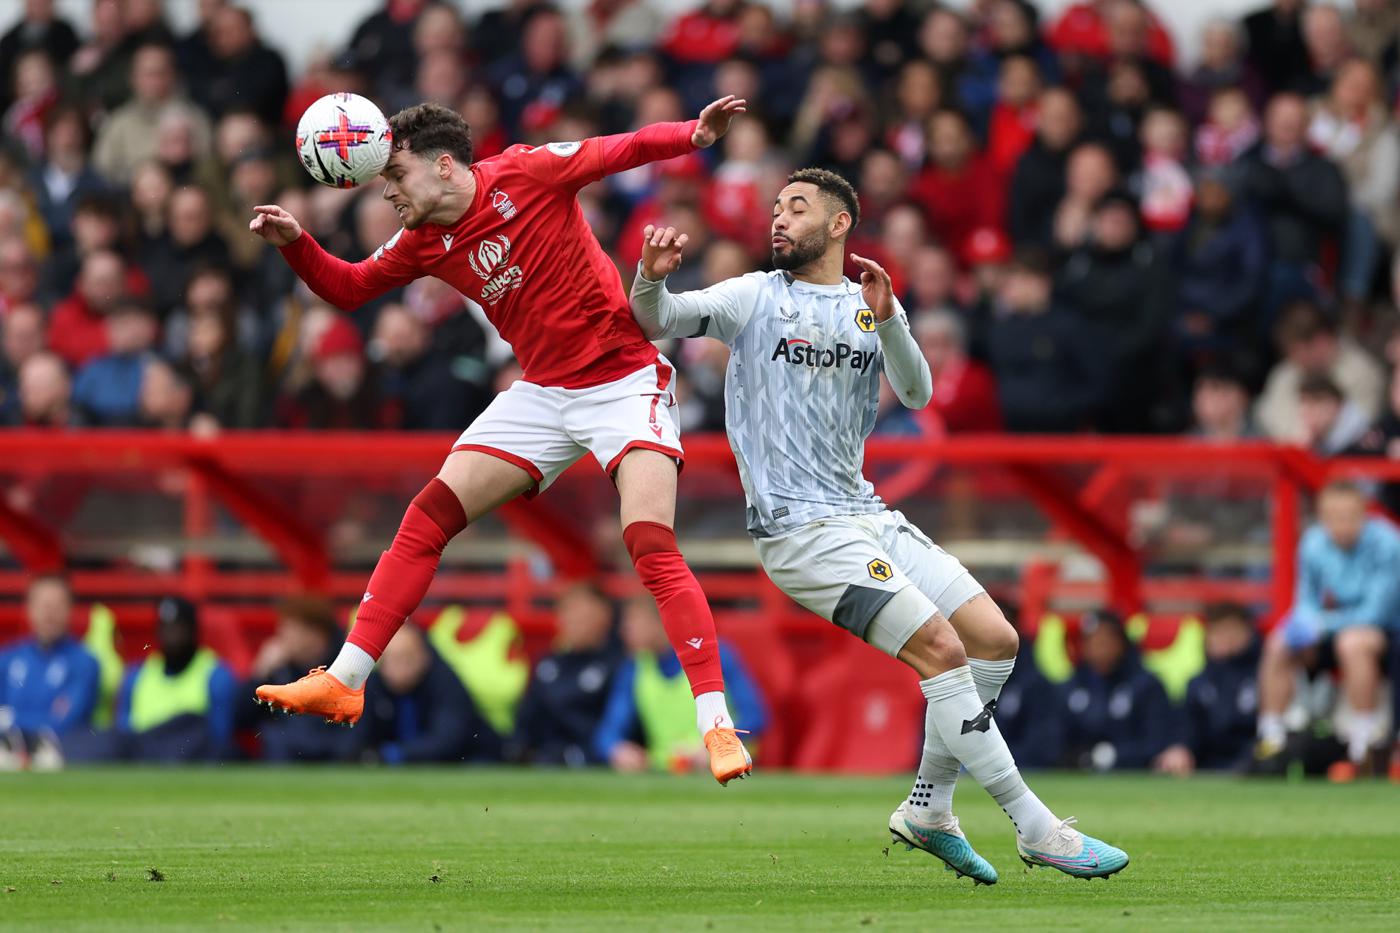 Nottingham Forest - Wolves - 1:1. Championship of England, 29th round. Match review, statistics